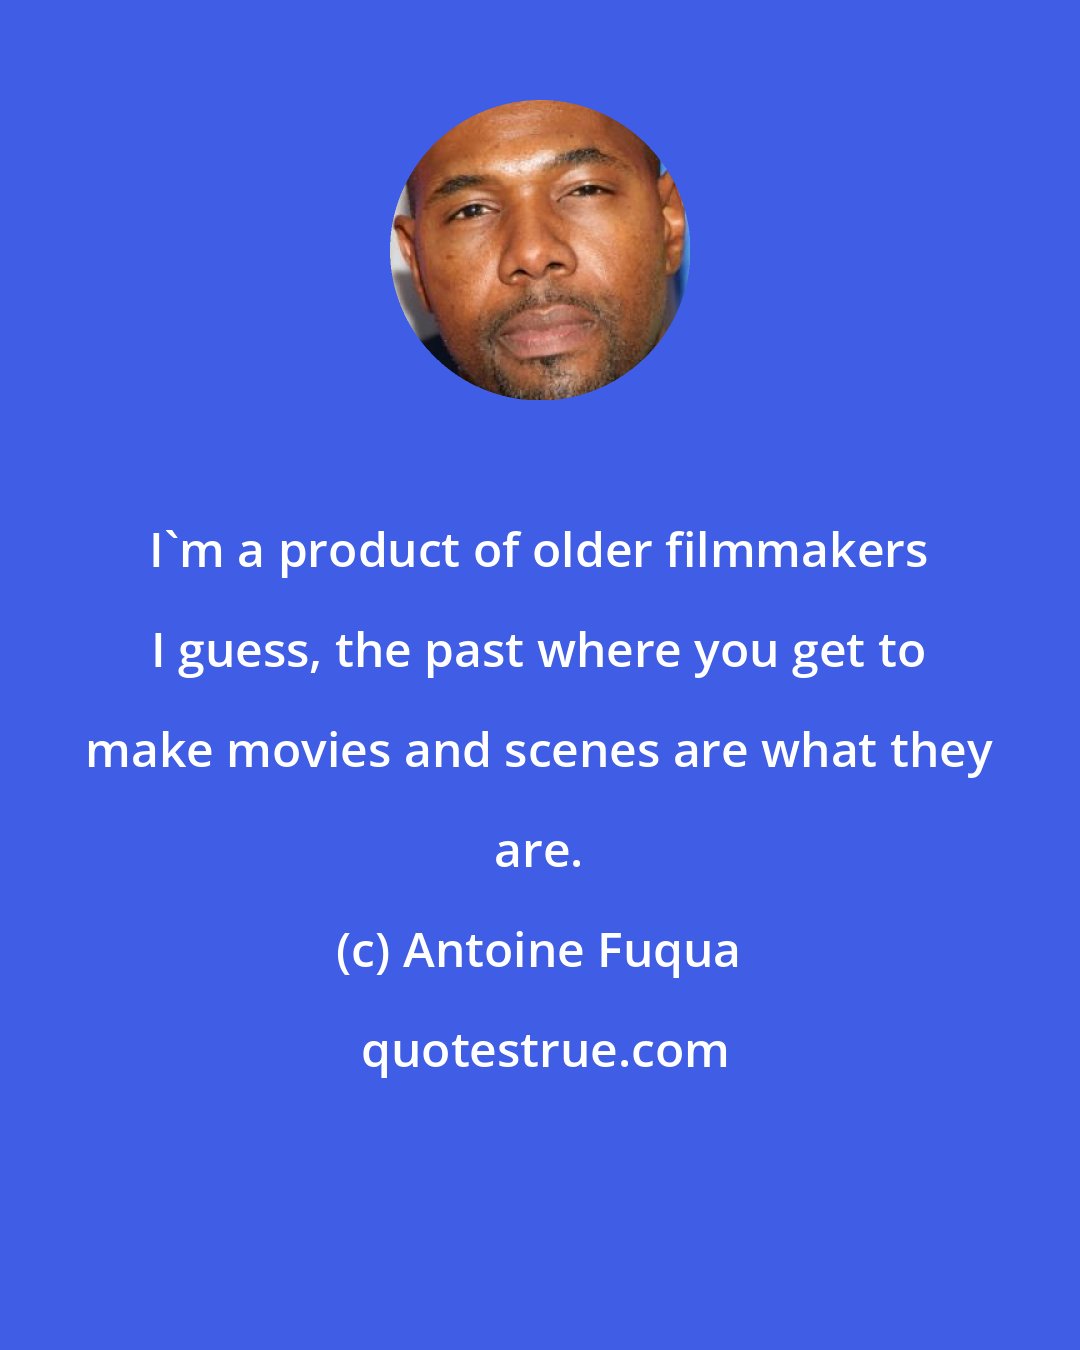 Antoine Fuqua: I'm a product of older filmmakers I guess, the past where you get to make movies and scenes are what they are.